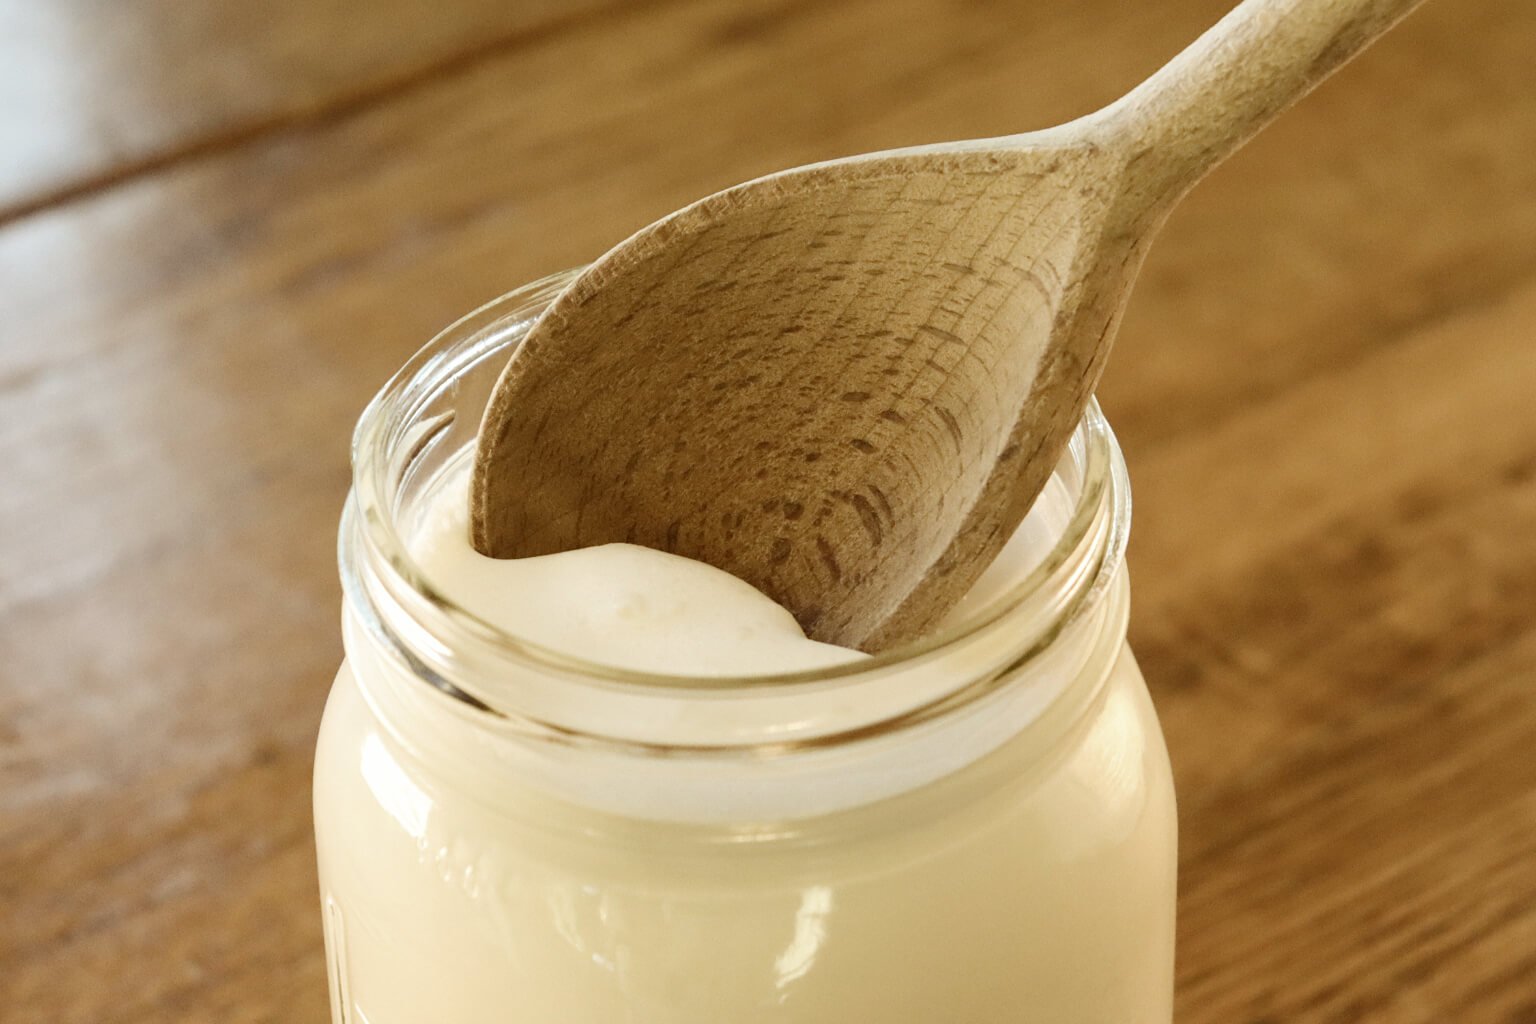 skimming cream off the top of a mason jar filled with milk using a wooden spoon